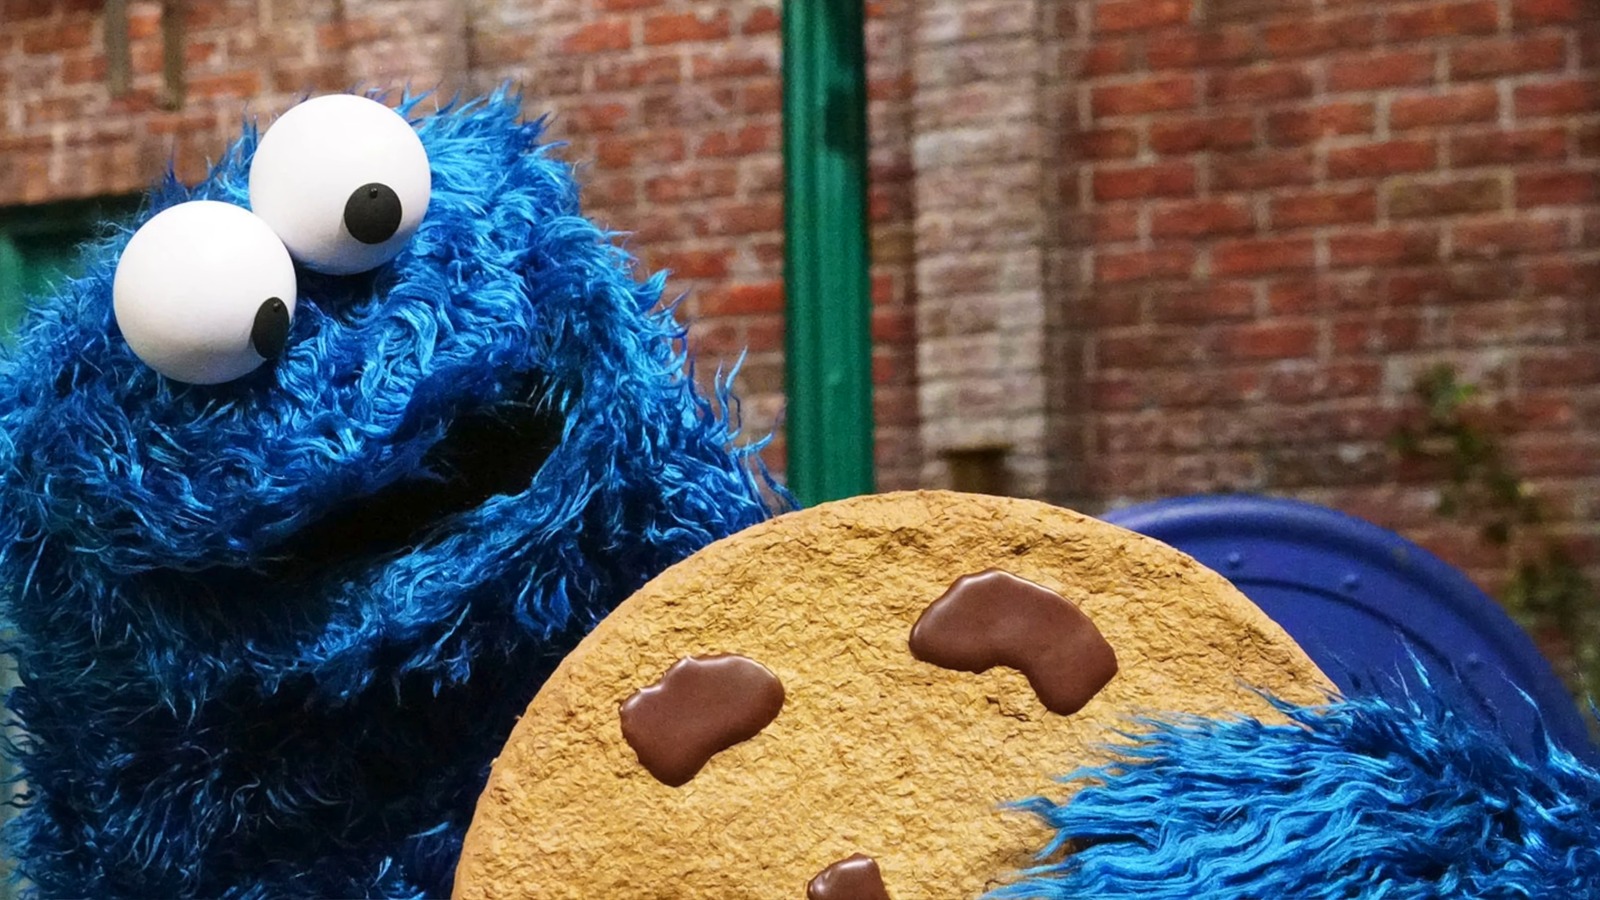 Cookie Monster has been eating rice and instant coffee this whole time